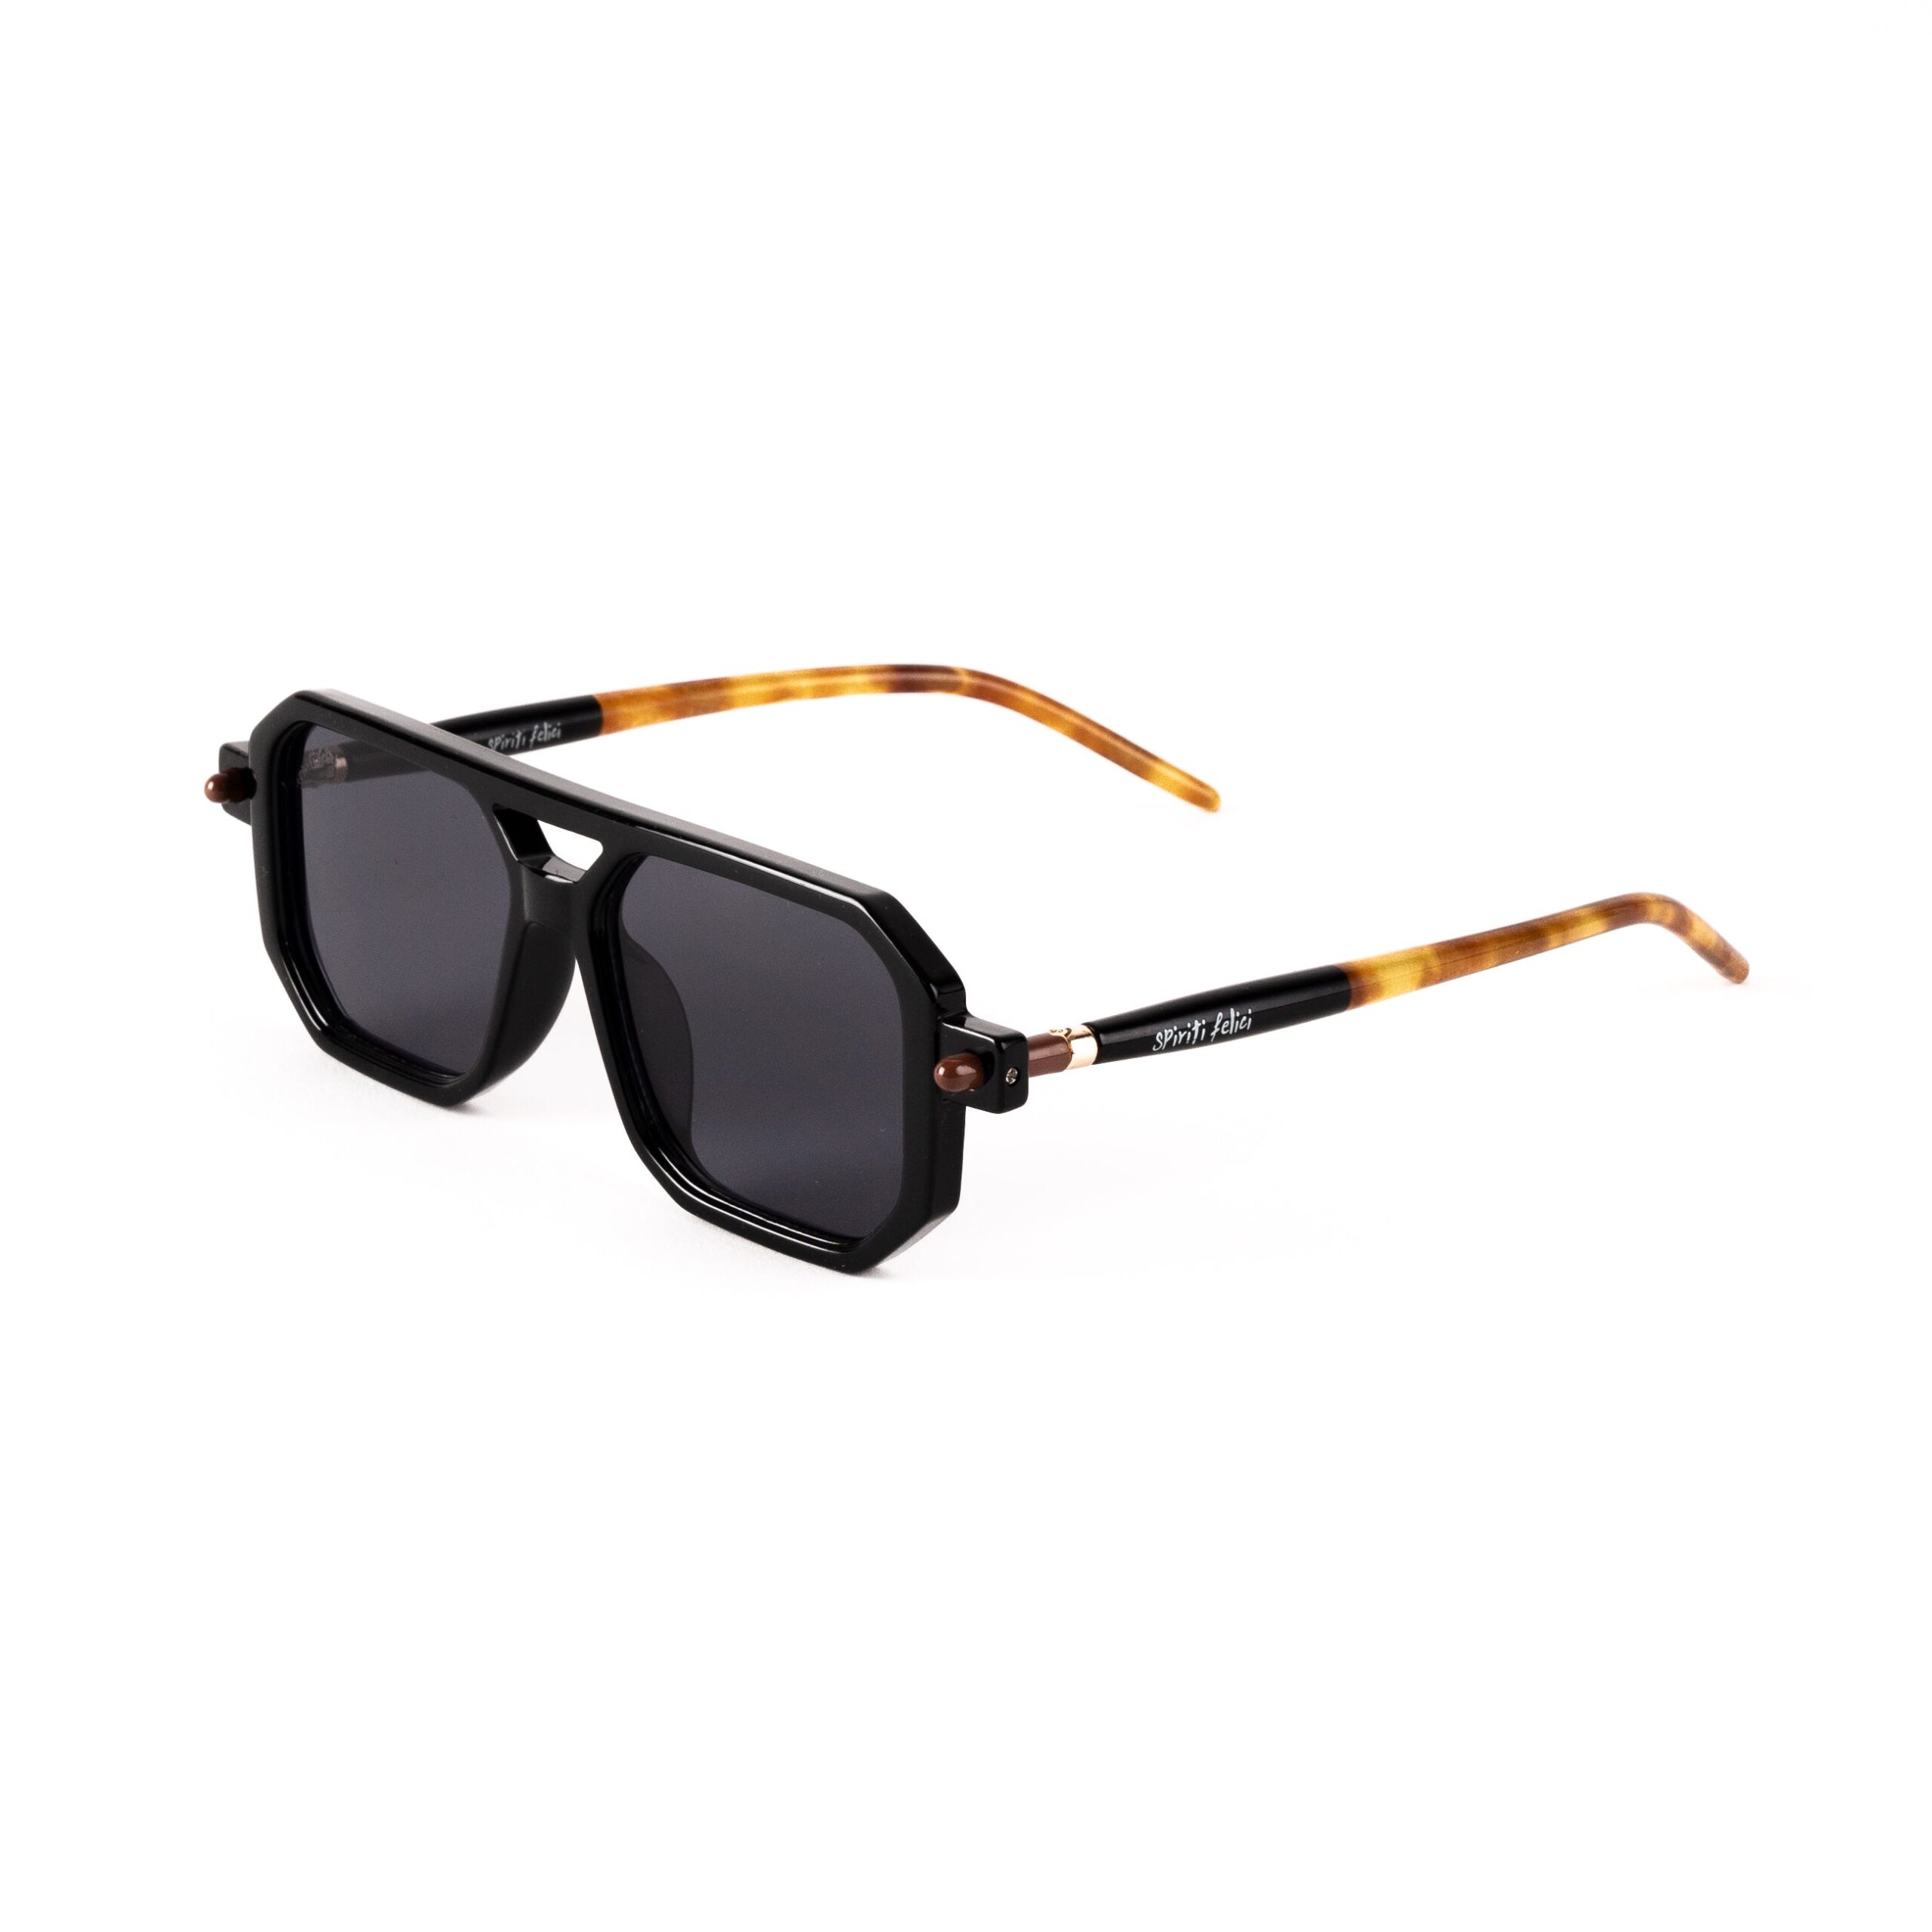 Buy BLOCK sunglasses from Spiriti Felici available online at VEND. Explore more product category collections now